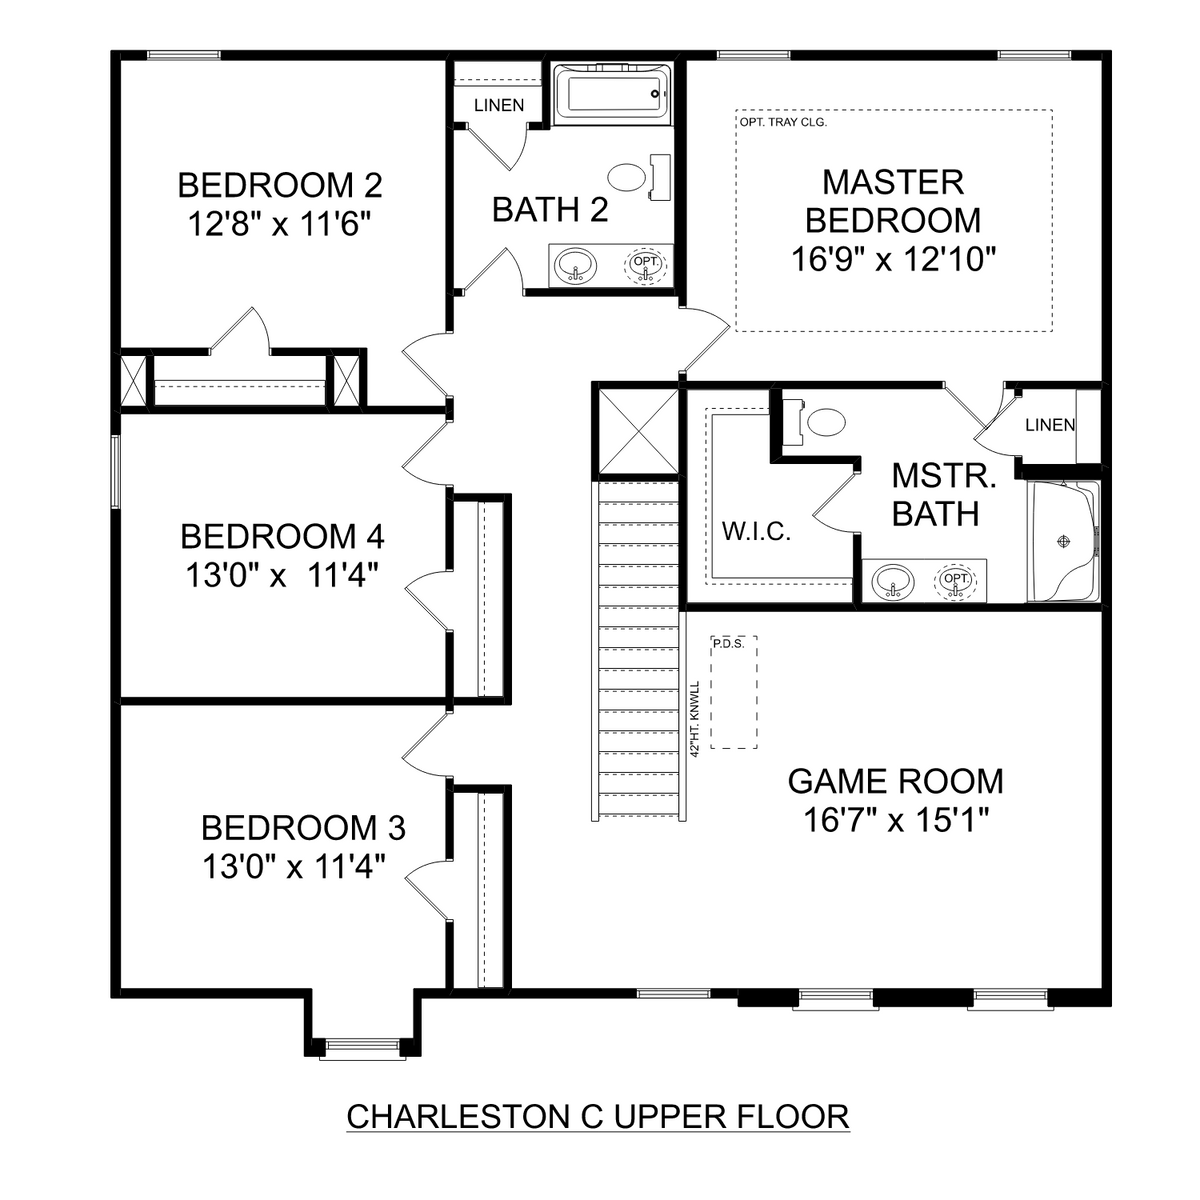 2 - The Charleston C floor plan layout for 2144 Mcafee Road in Davidson Homes' The Reserve at North Ridge community.